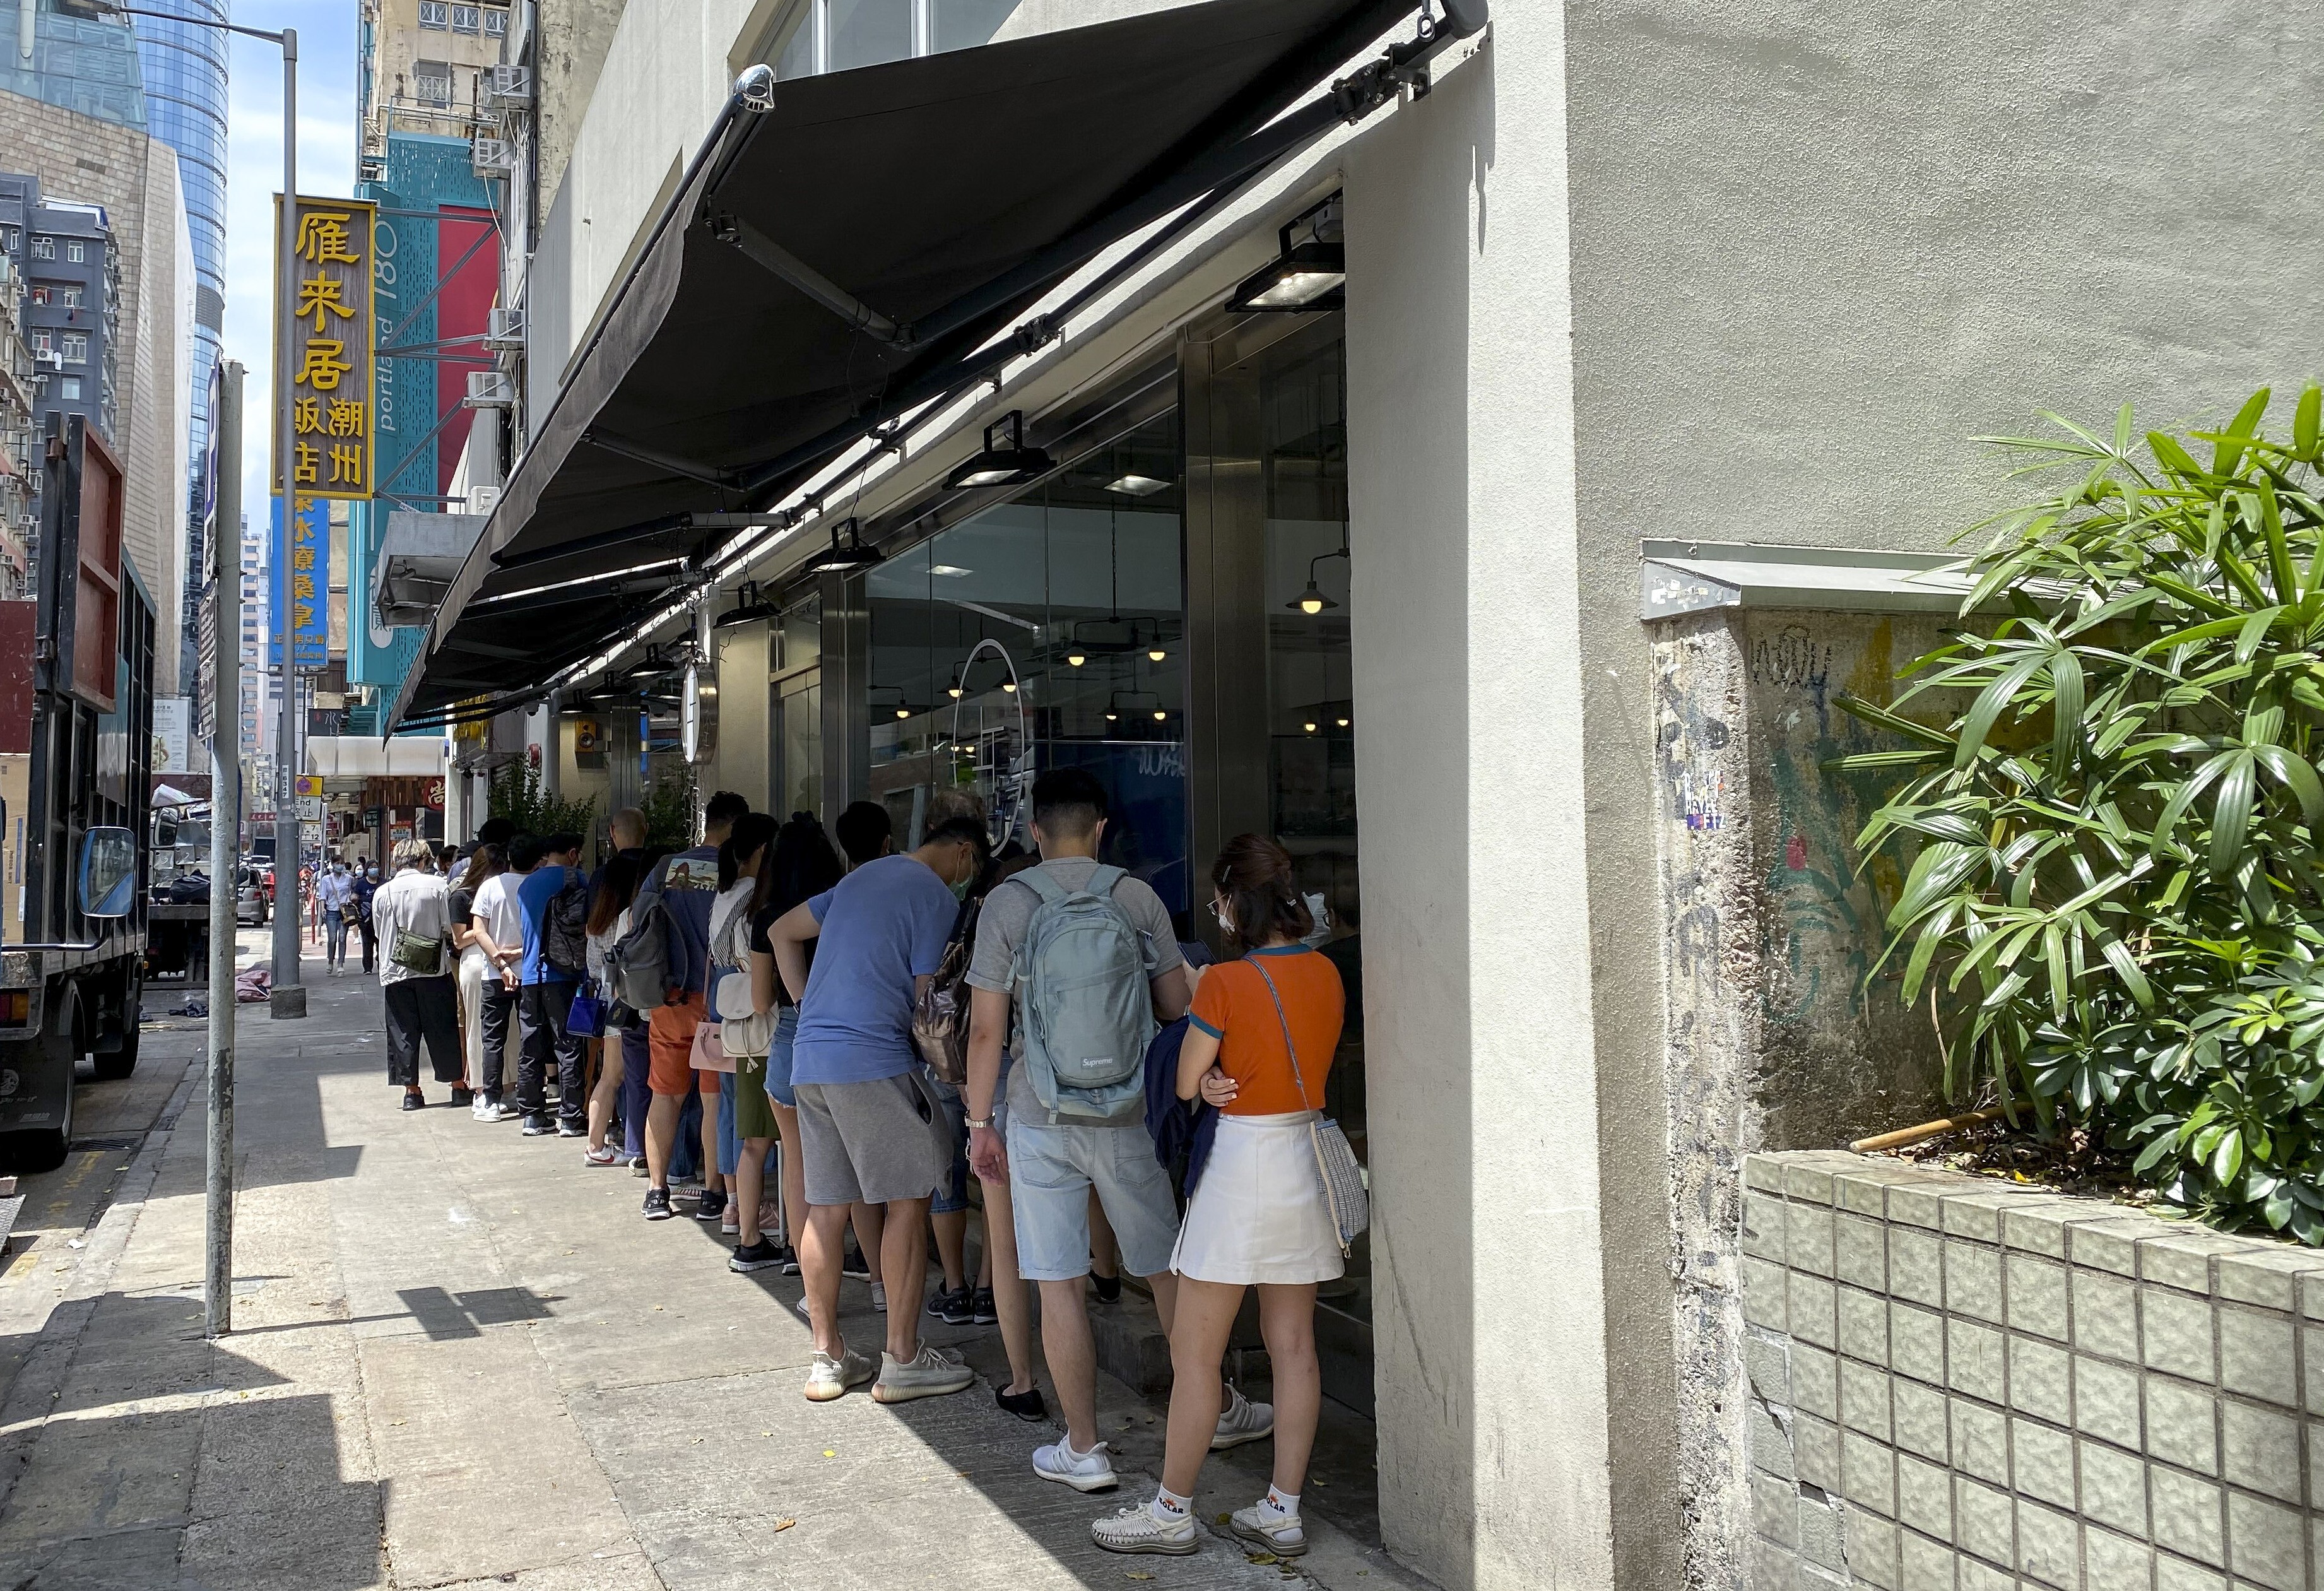 More than 30 people queue up outside Jie Genge, a Taiwanese restaurant known to support the anti-government protests, as ‘mini golden week’ gets under way on May 1. Photo: Karen Zhang